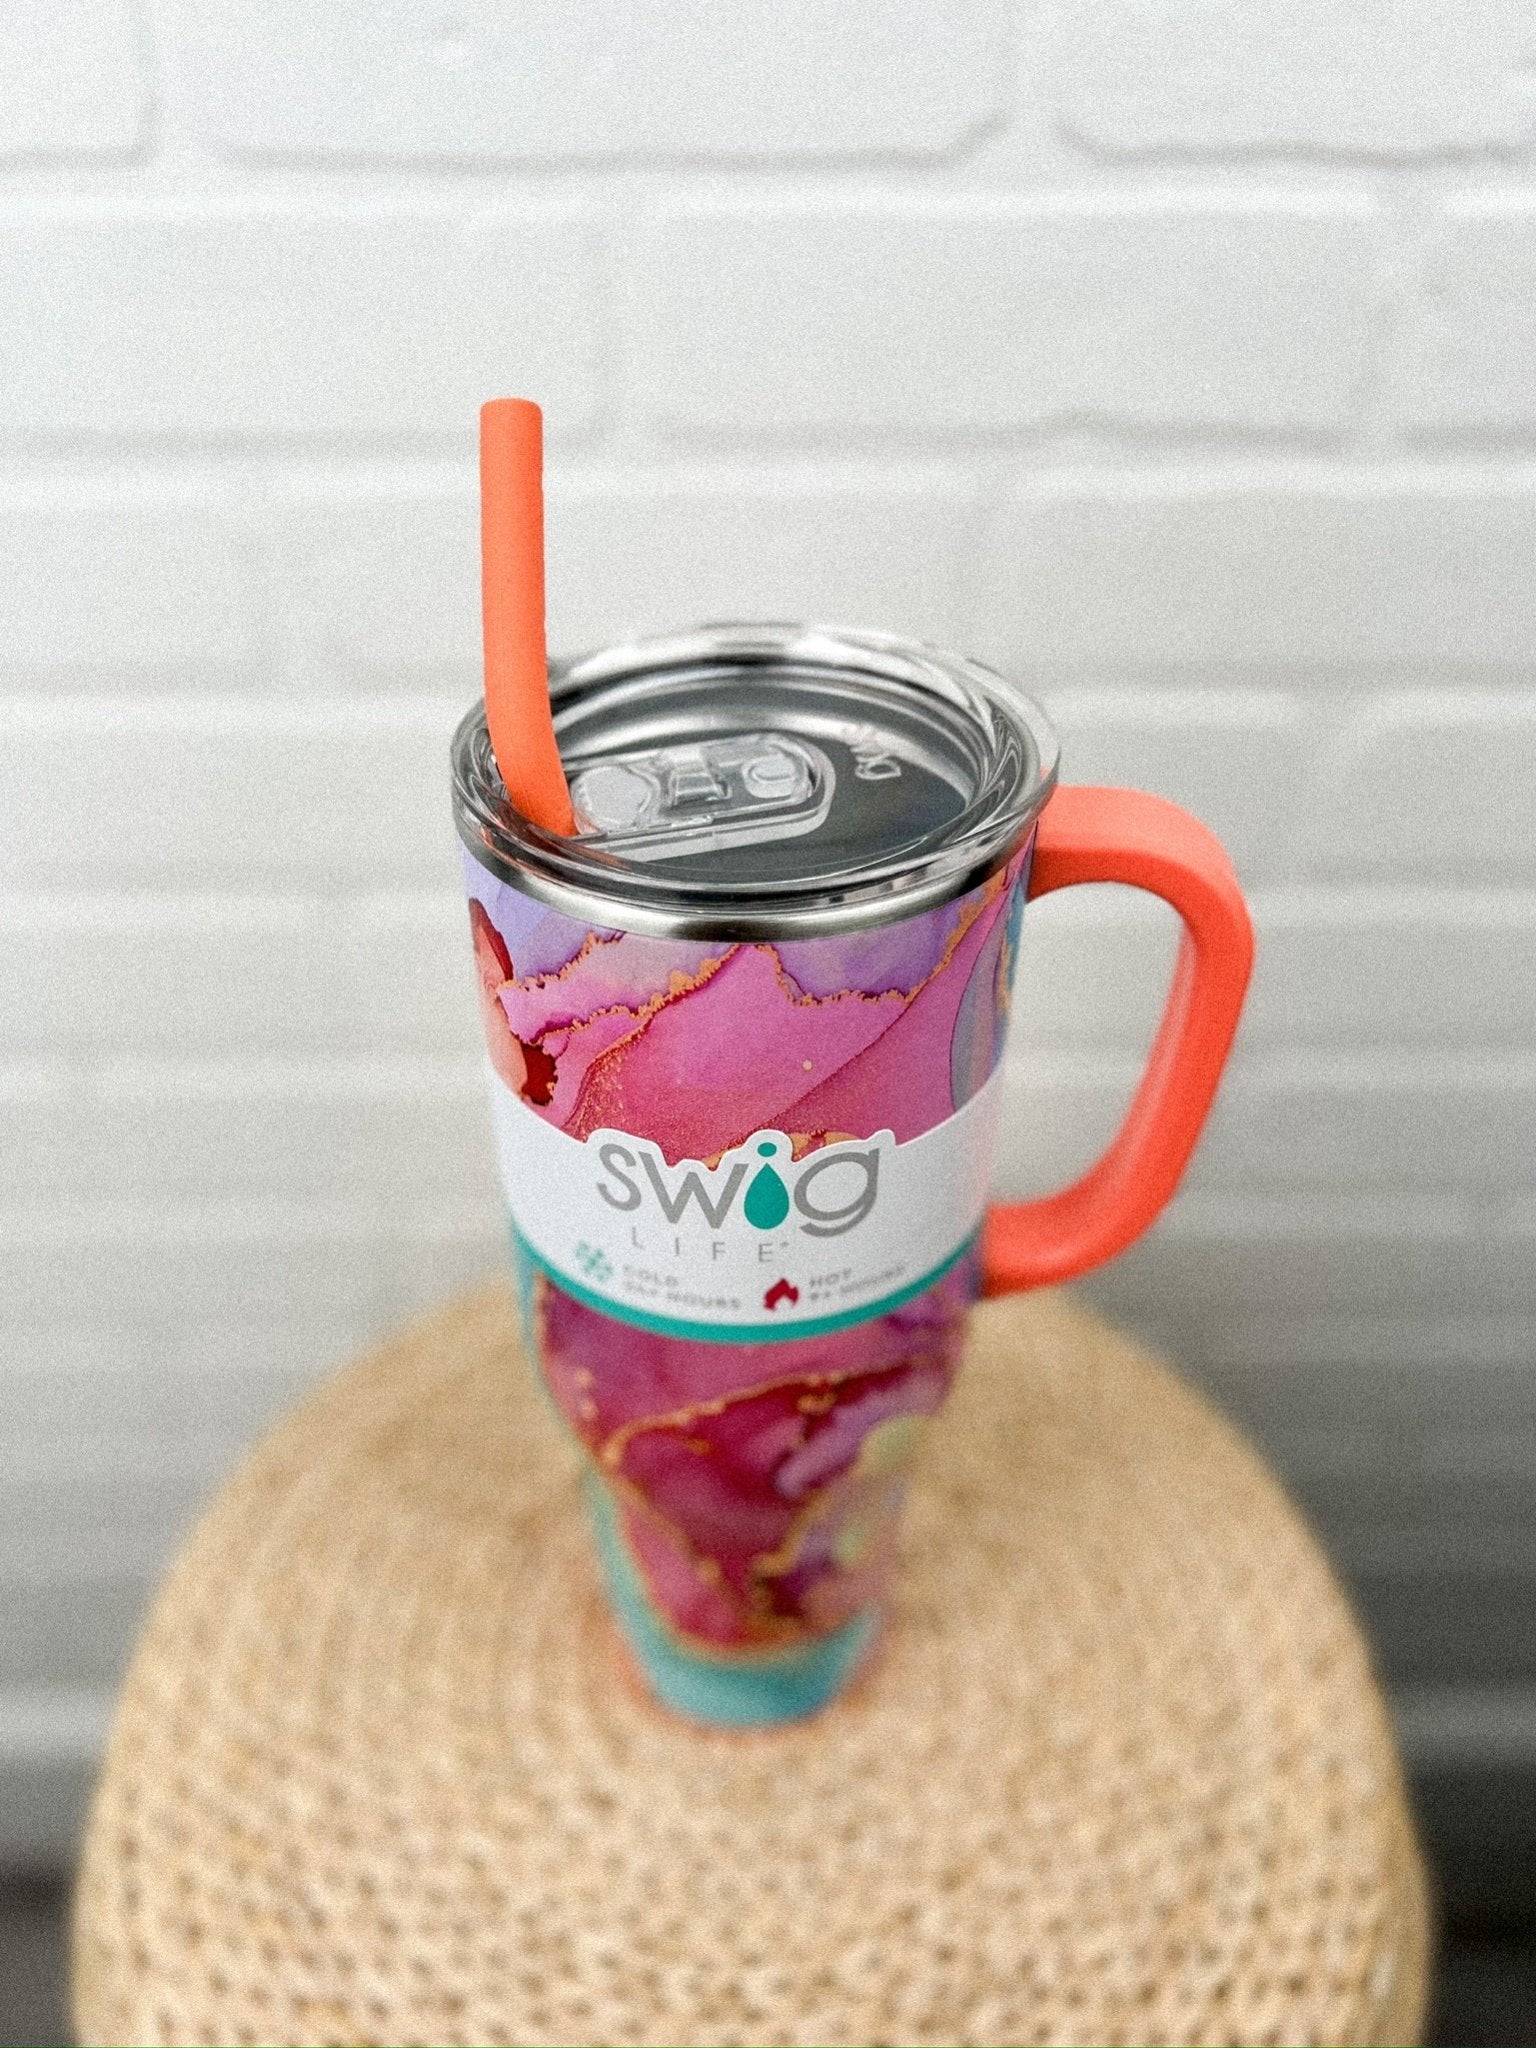 Swig dreamsicle 40oz tumbler - Trendy Tumblers, Mugs and Cups at Lush Fashion Lounge Boutique in Oklahoma City